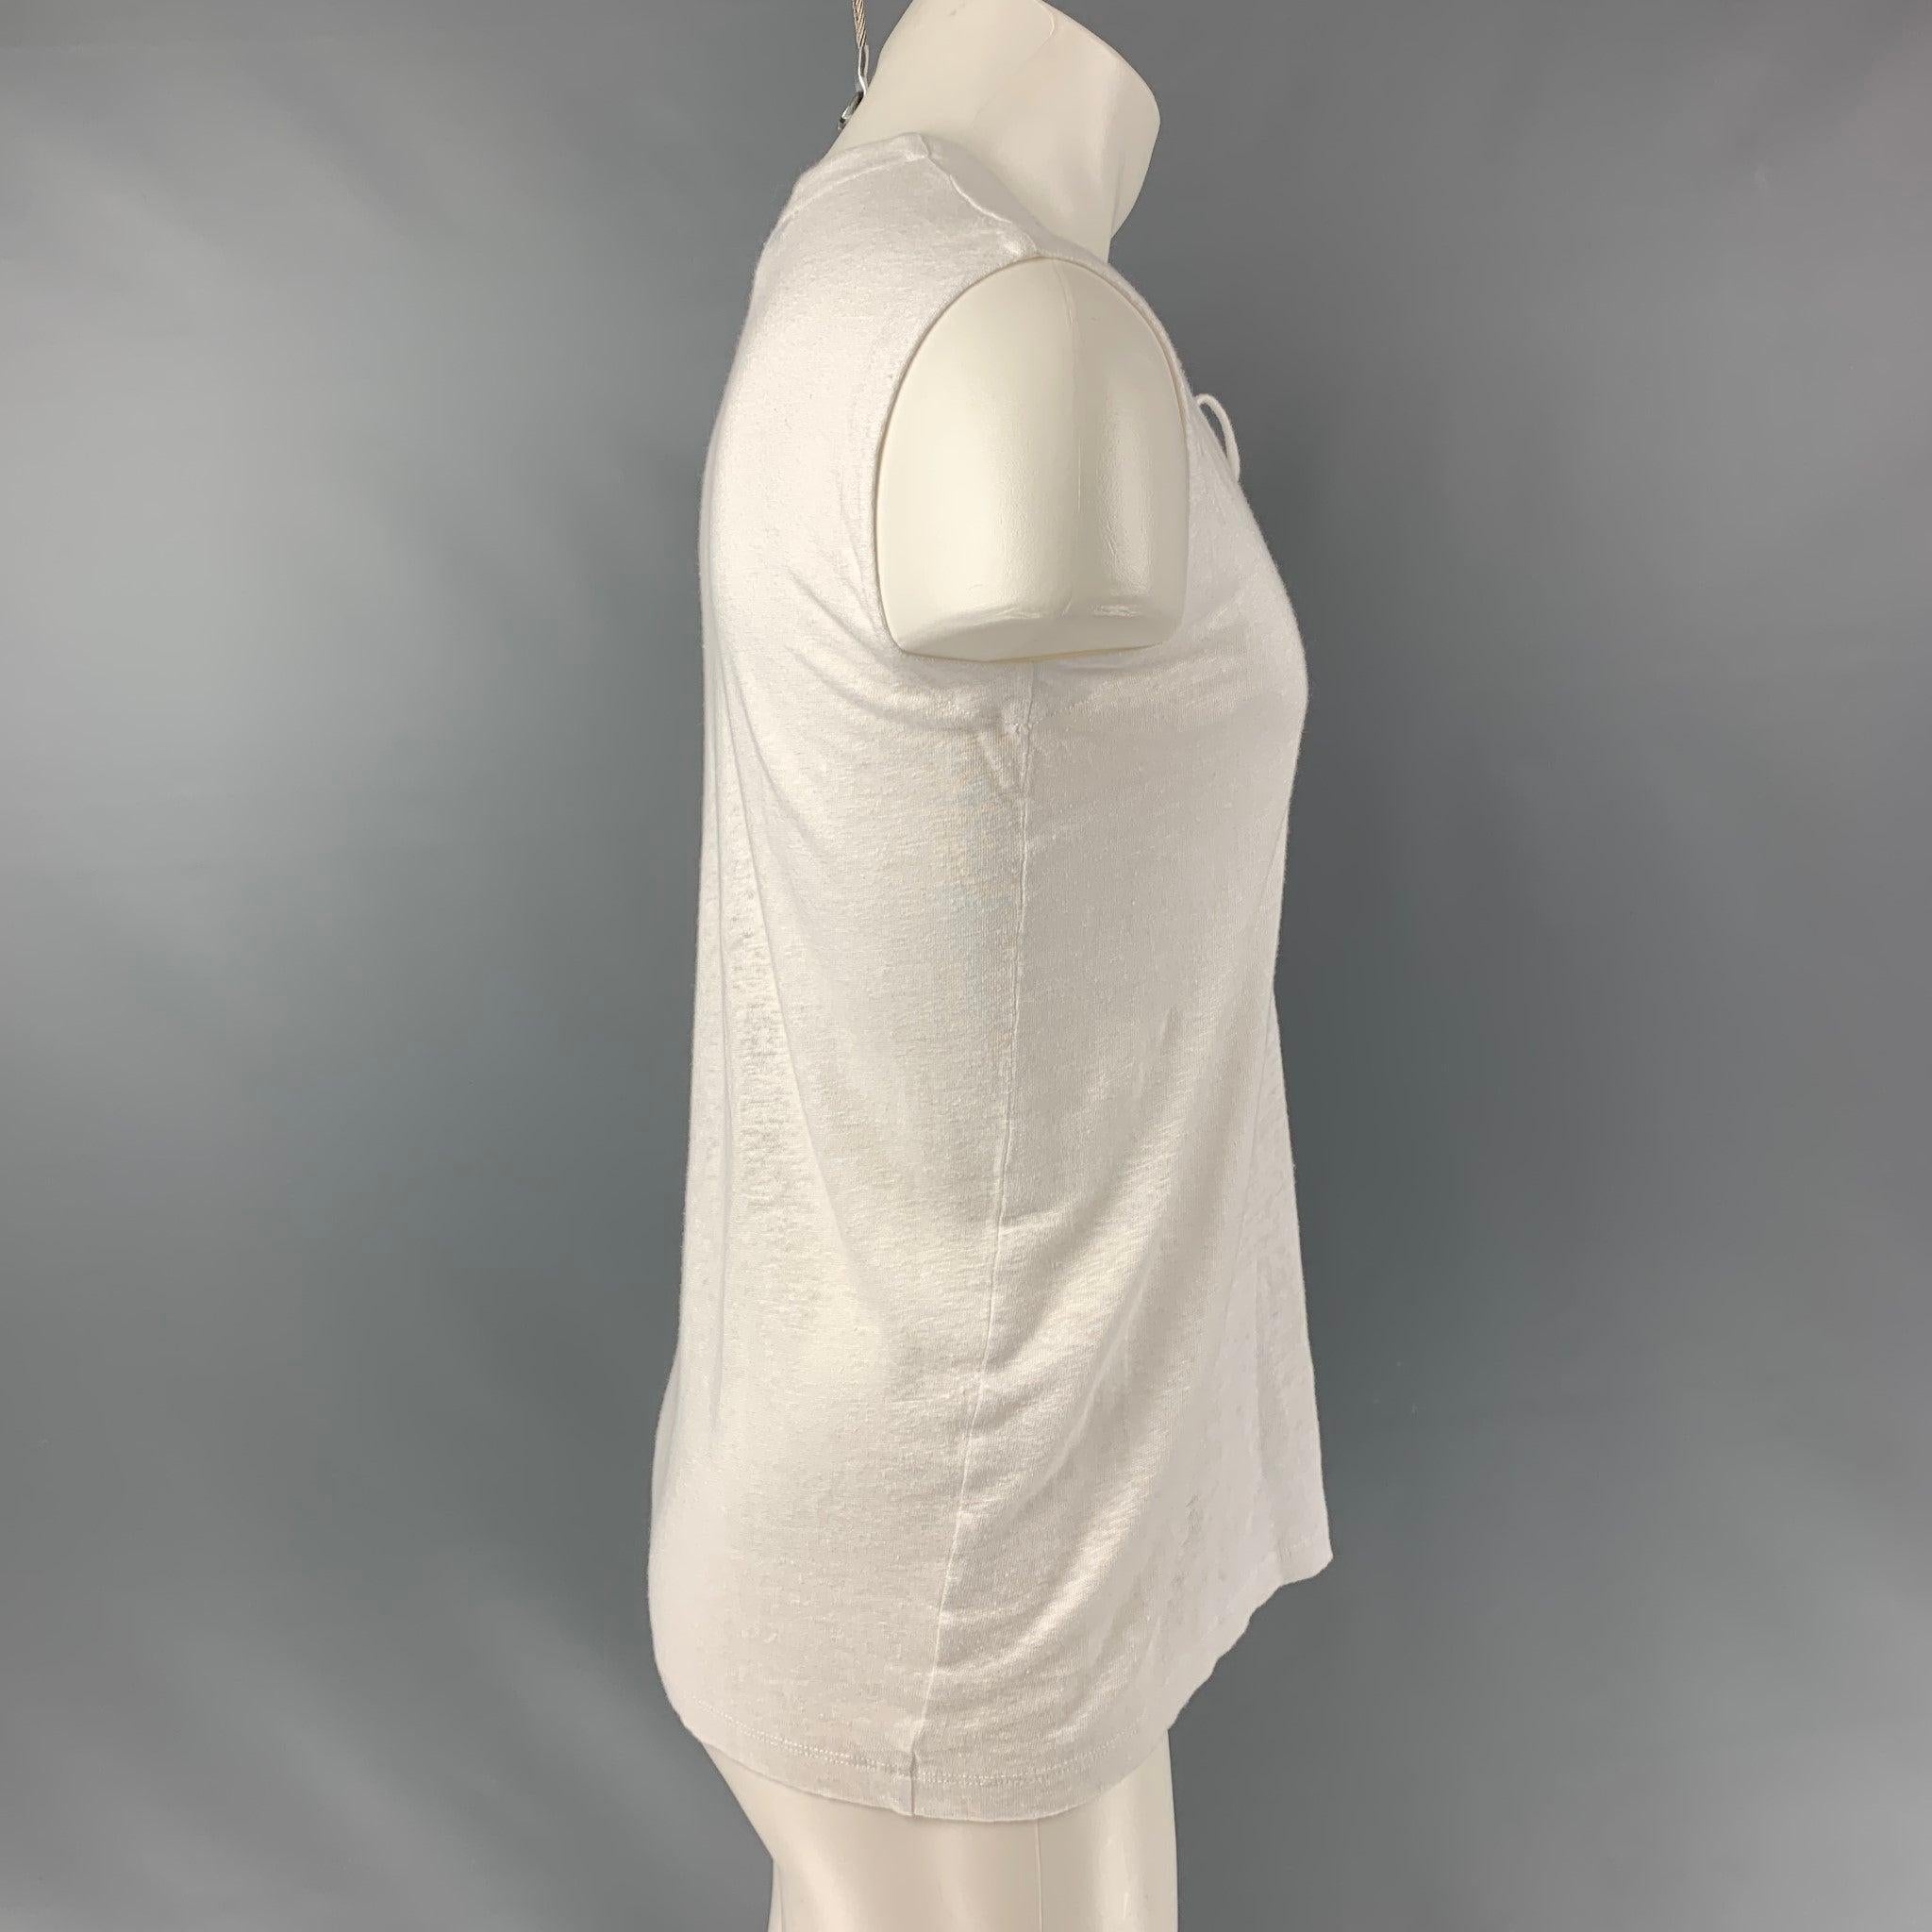 IRO JEANS Tissa tank top comes in a white partially see through linen jersey featuring a laced chest detail and crew-neck. Made in Portugal.Excellent Pre-Owned Condition.  

Marked:   XS 

Measurements: 
 
Shoulder: 17 inches Chest: 40 inches